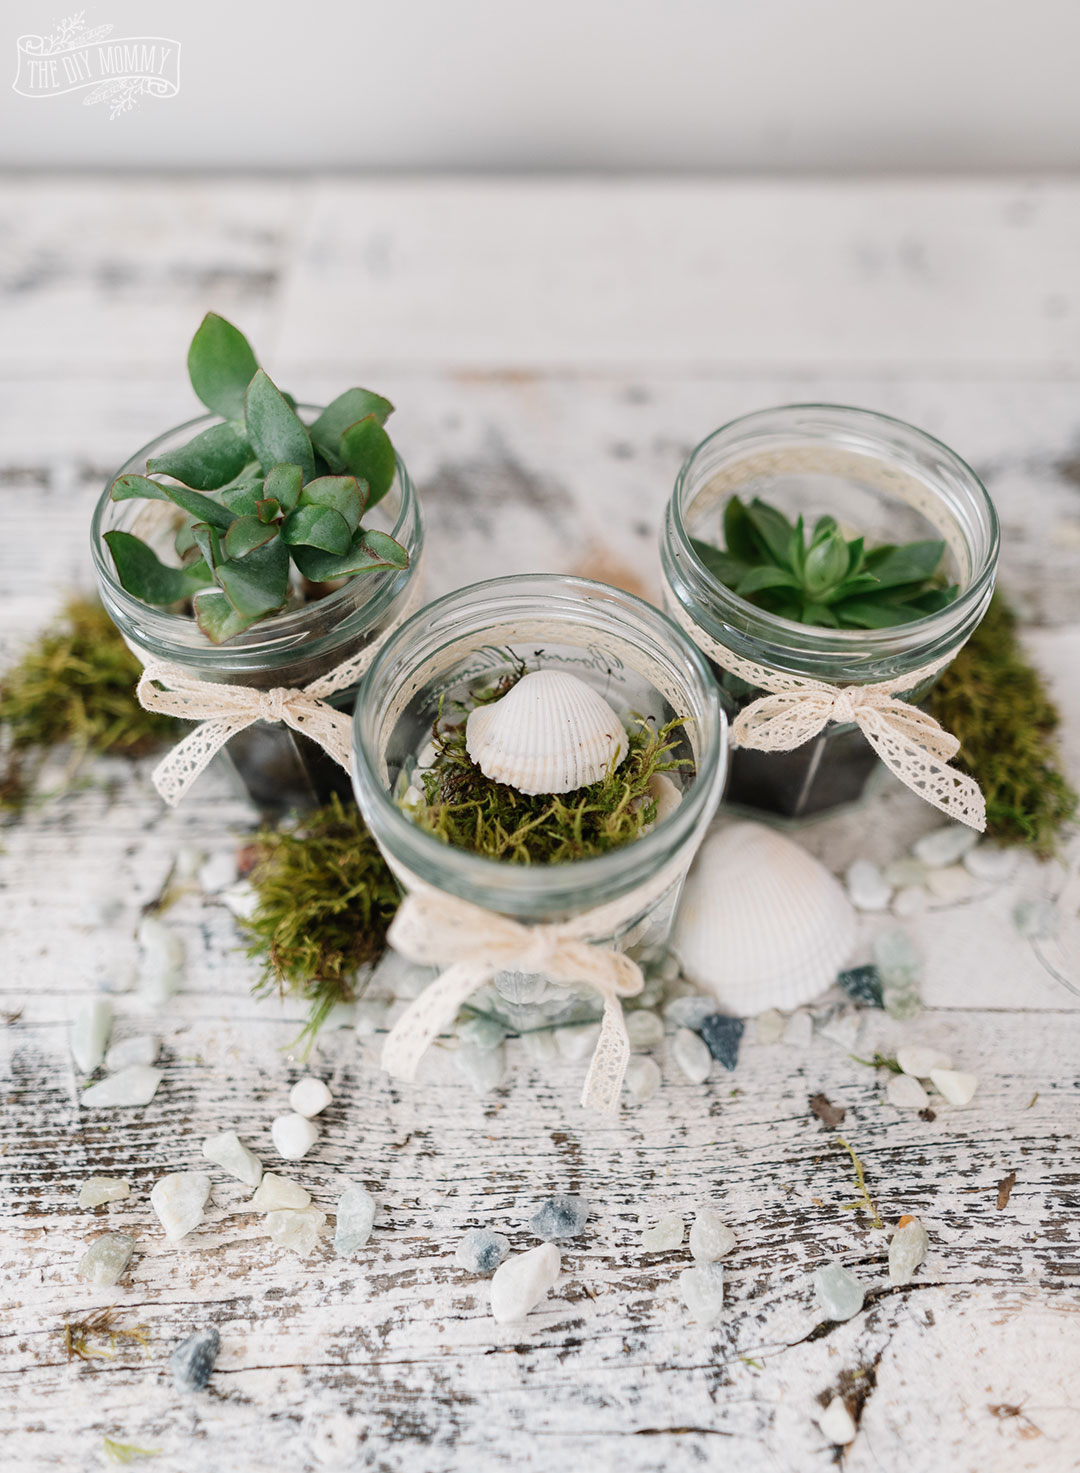 Upcycle jam jars into tiny terrariums with items you find around the house.